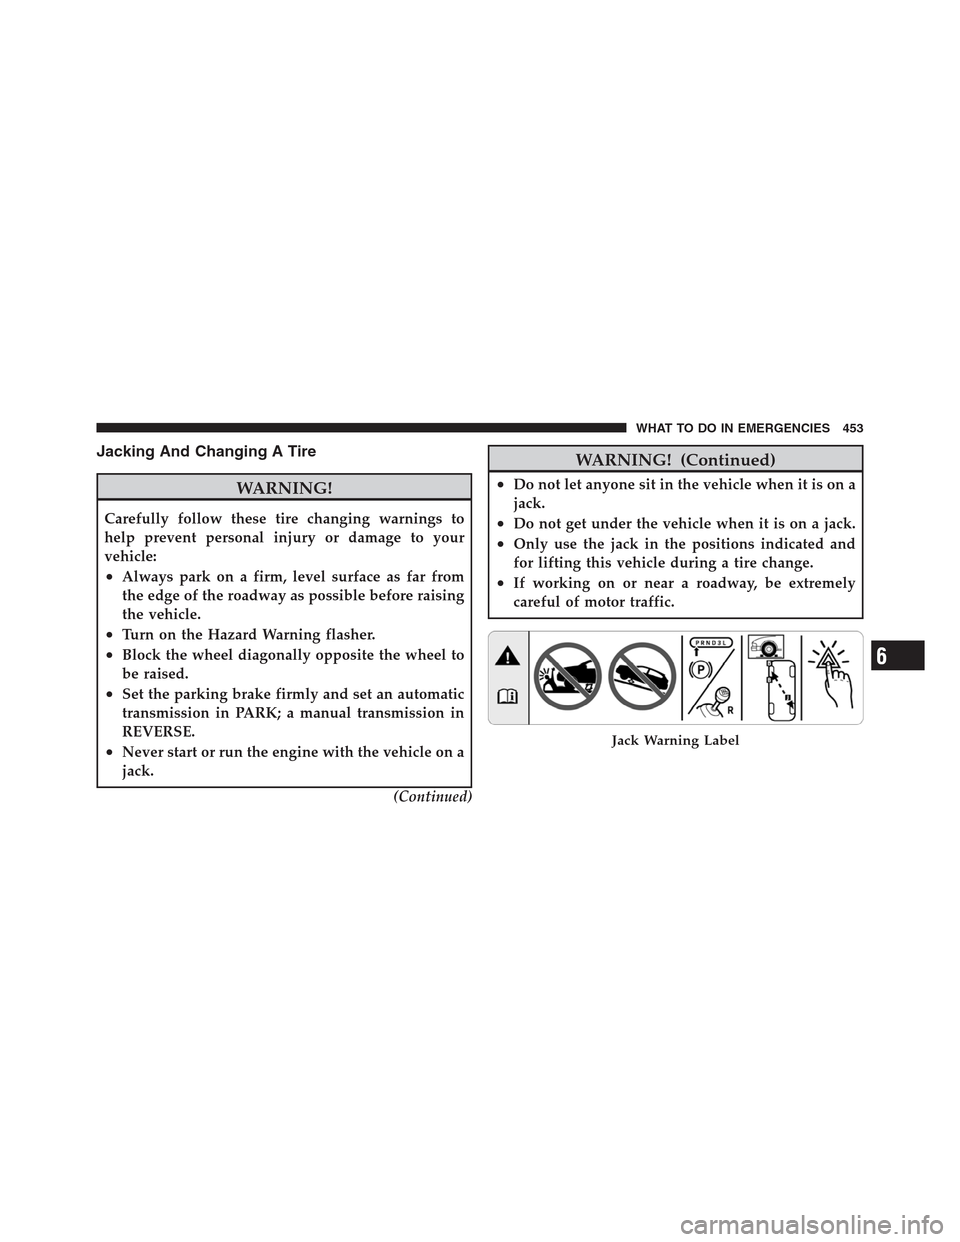 CHRYSLER 300 2012 2.G Owners Manual Jacking And Changing A Tire
WARNING!
Carefully follow these tire changing warnings to
help prevent personal injury or damage to your
vehicle:
•Always park on a firm, level surface as far from
the ed